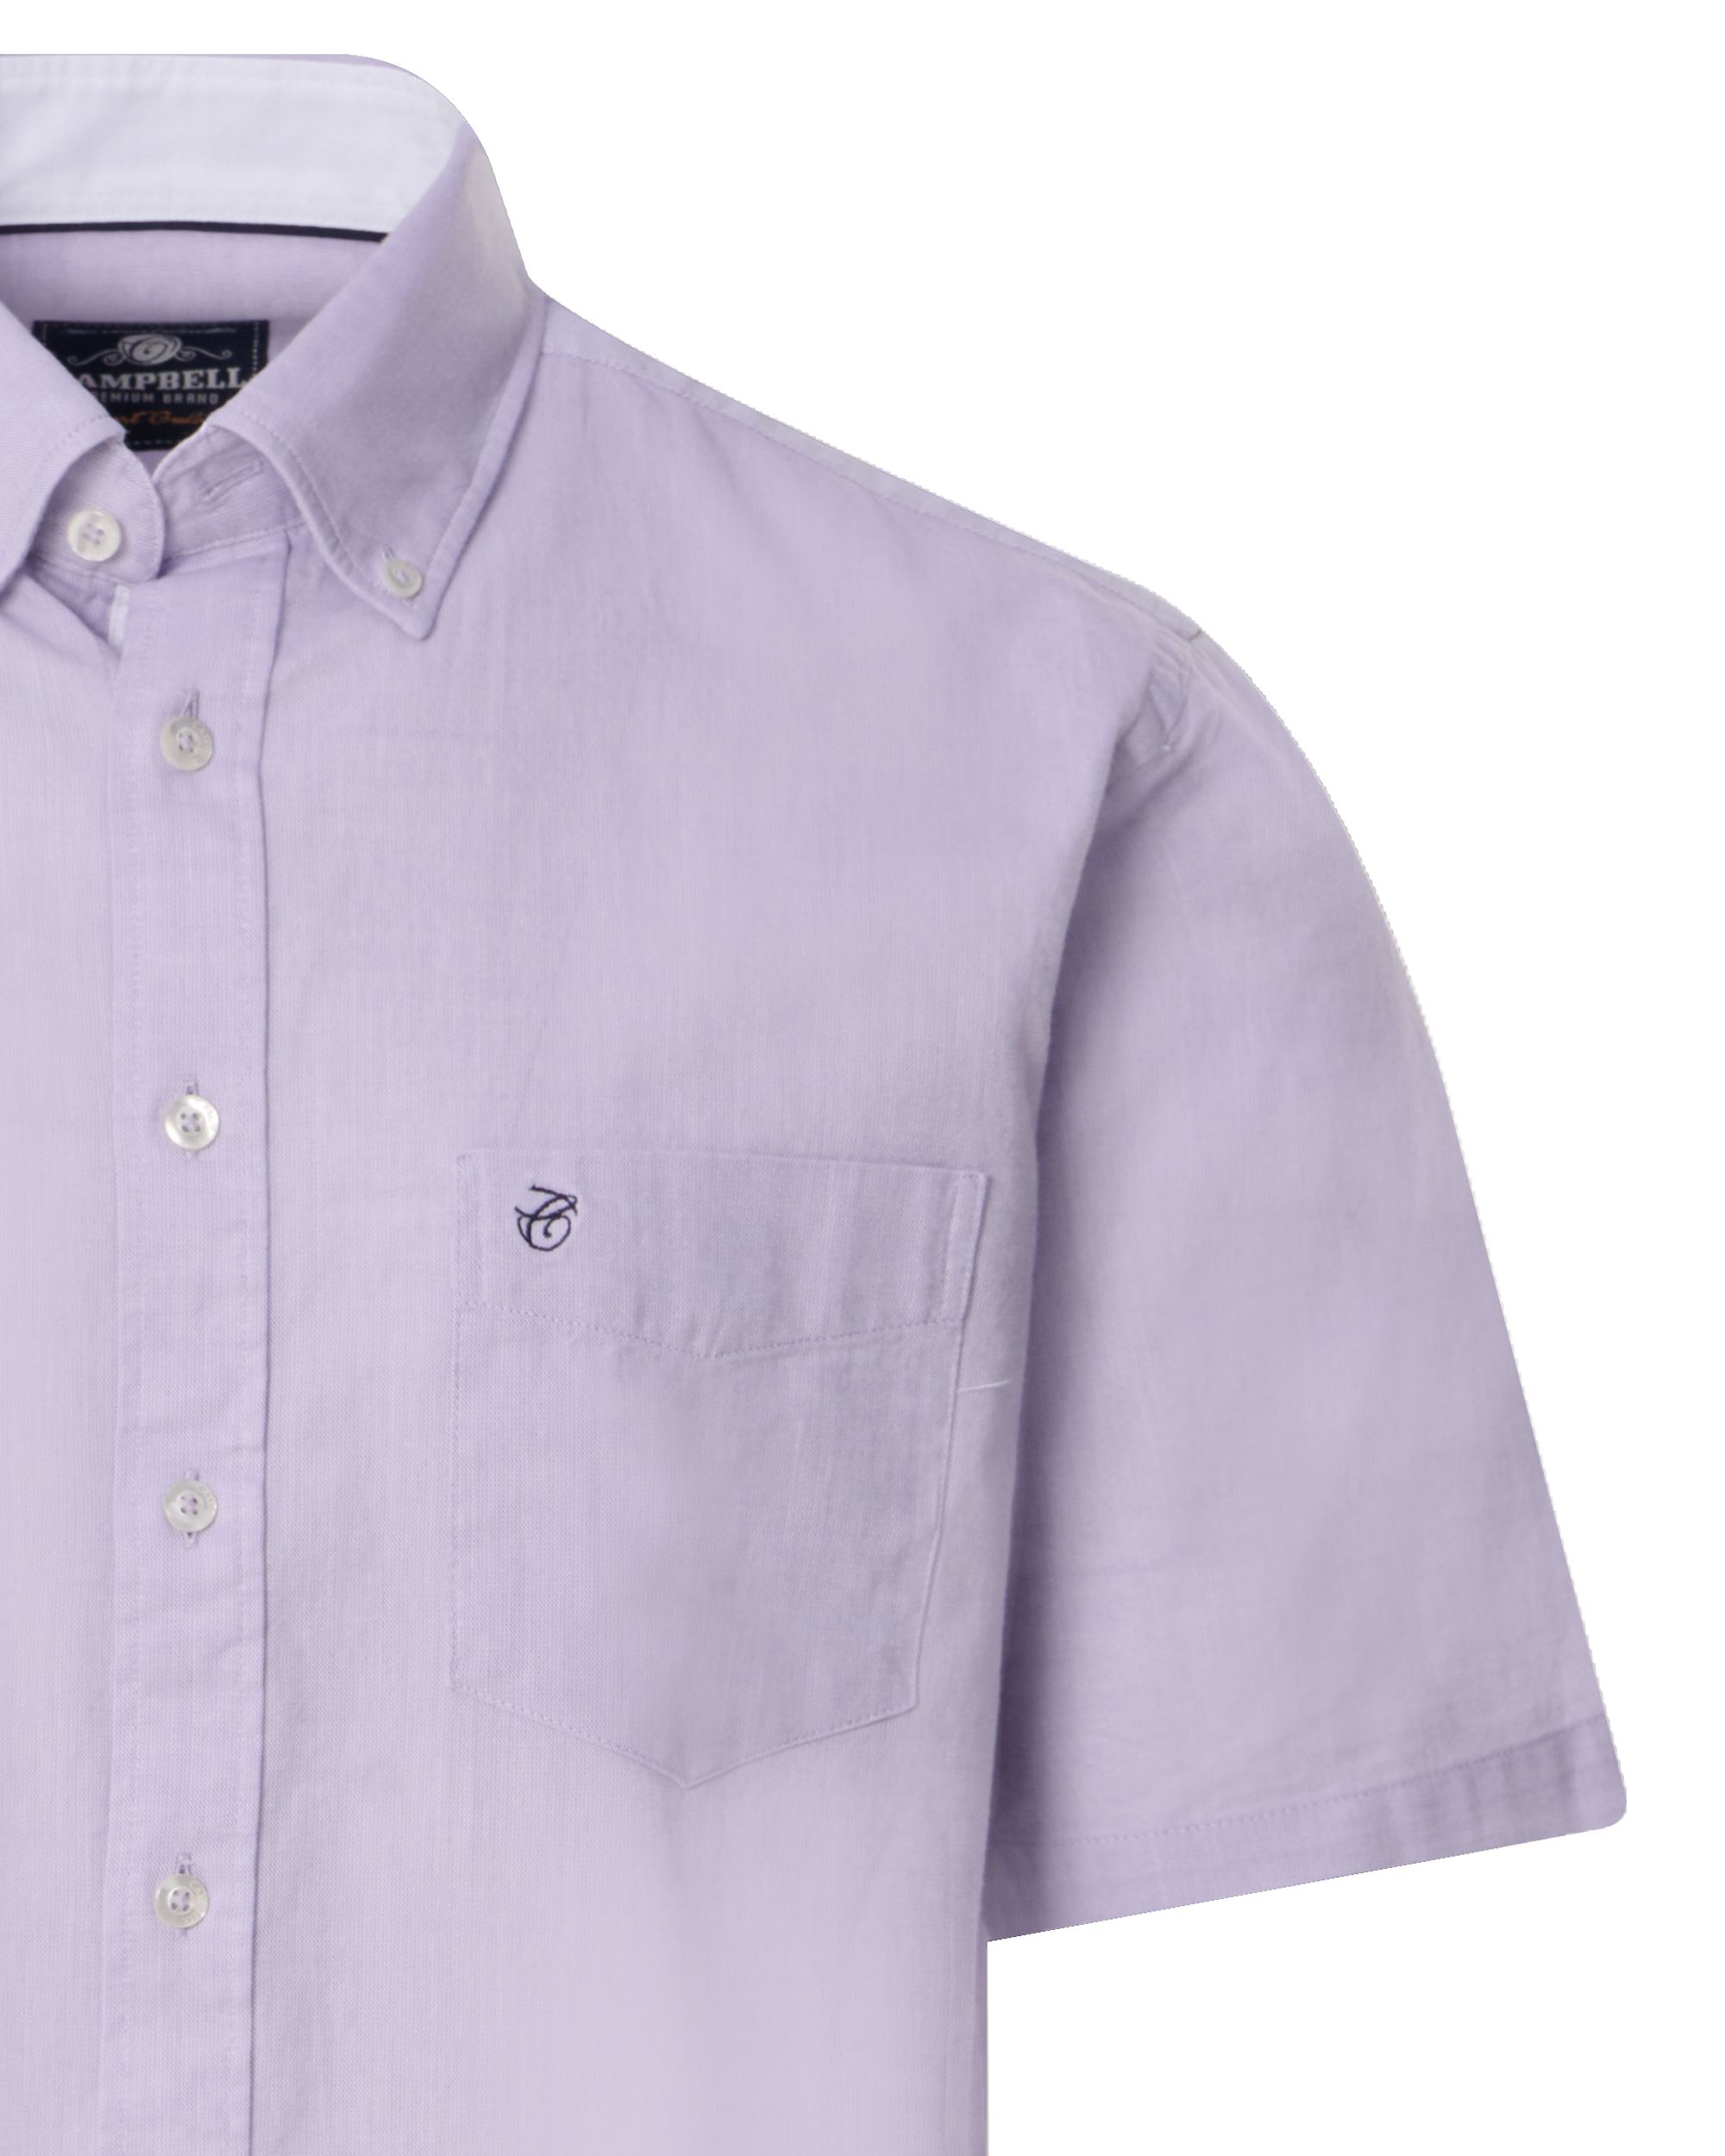 Campbell Classic Casual Overhemd KM Lavender Frost 091757-004-L